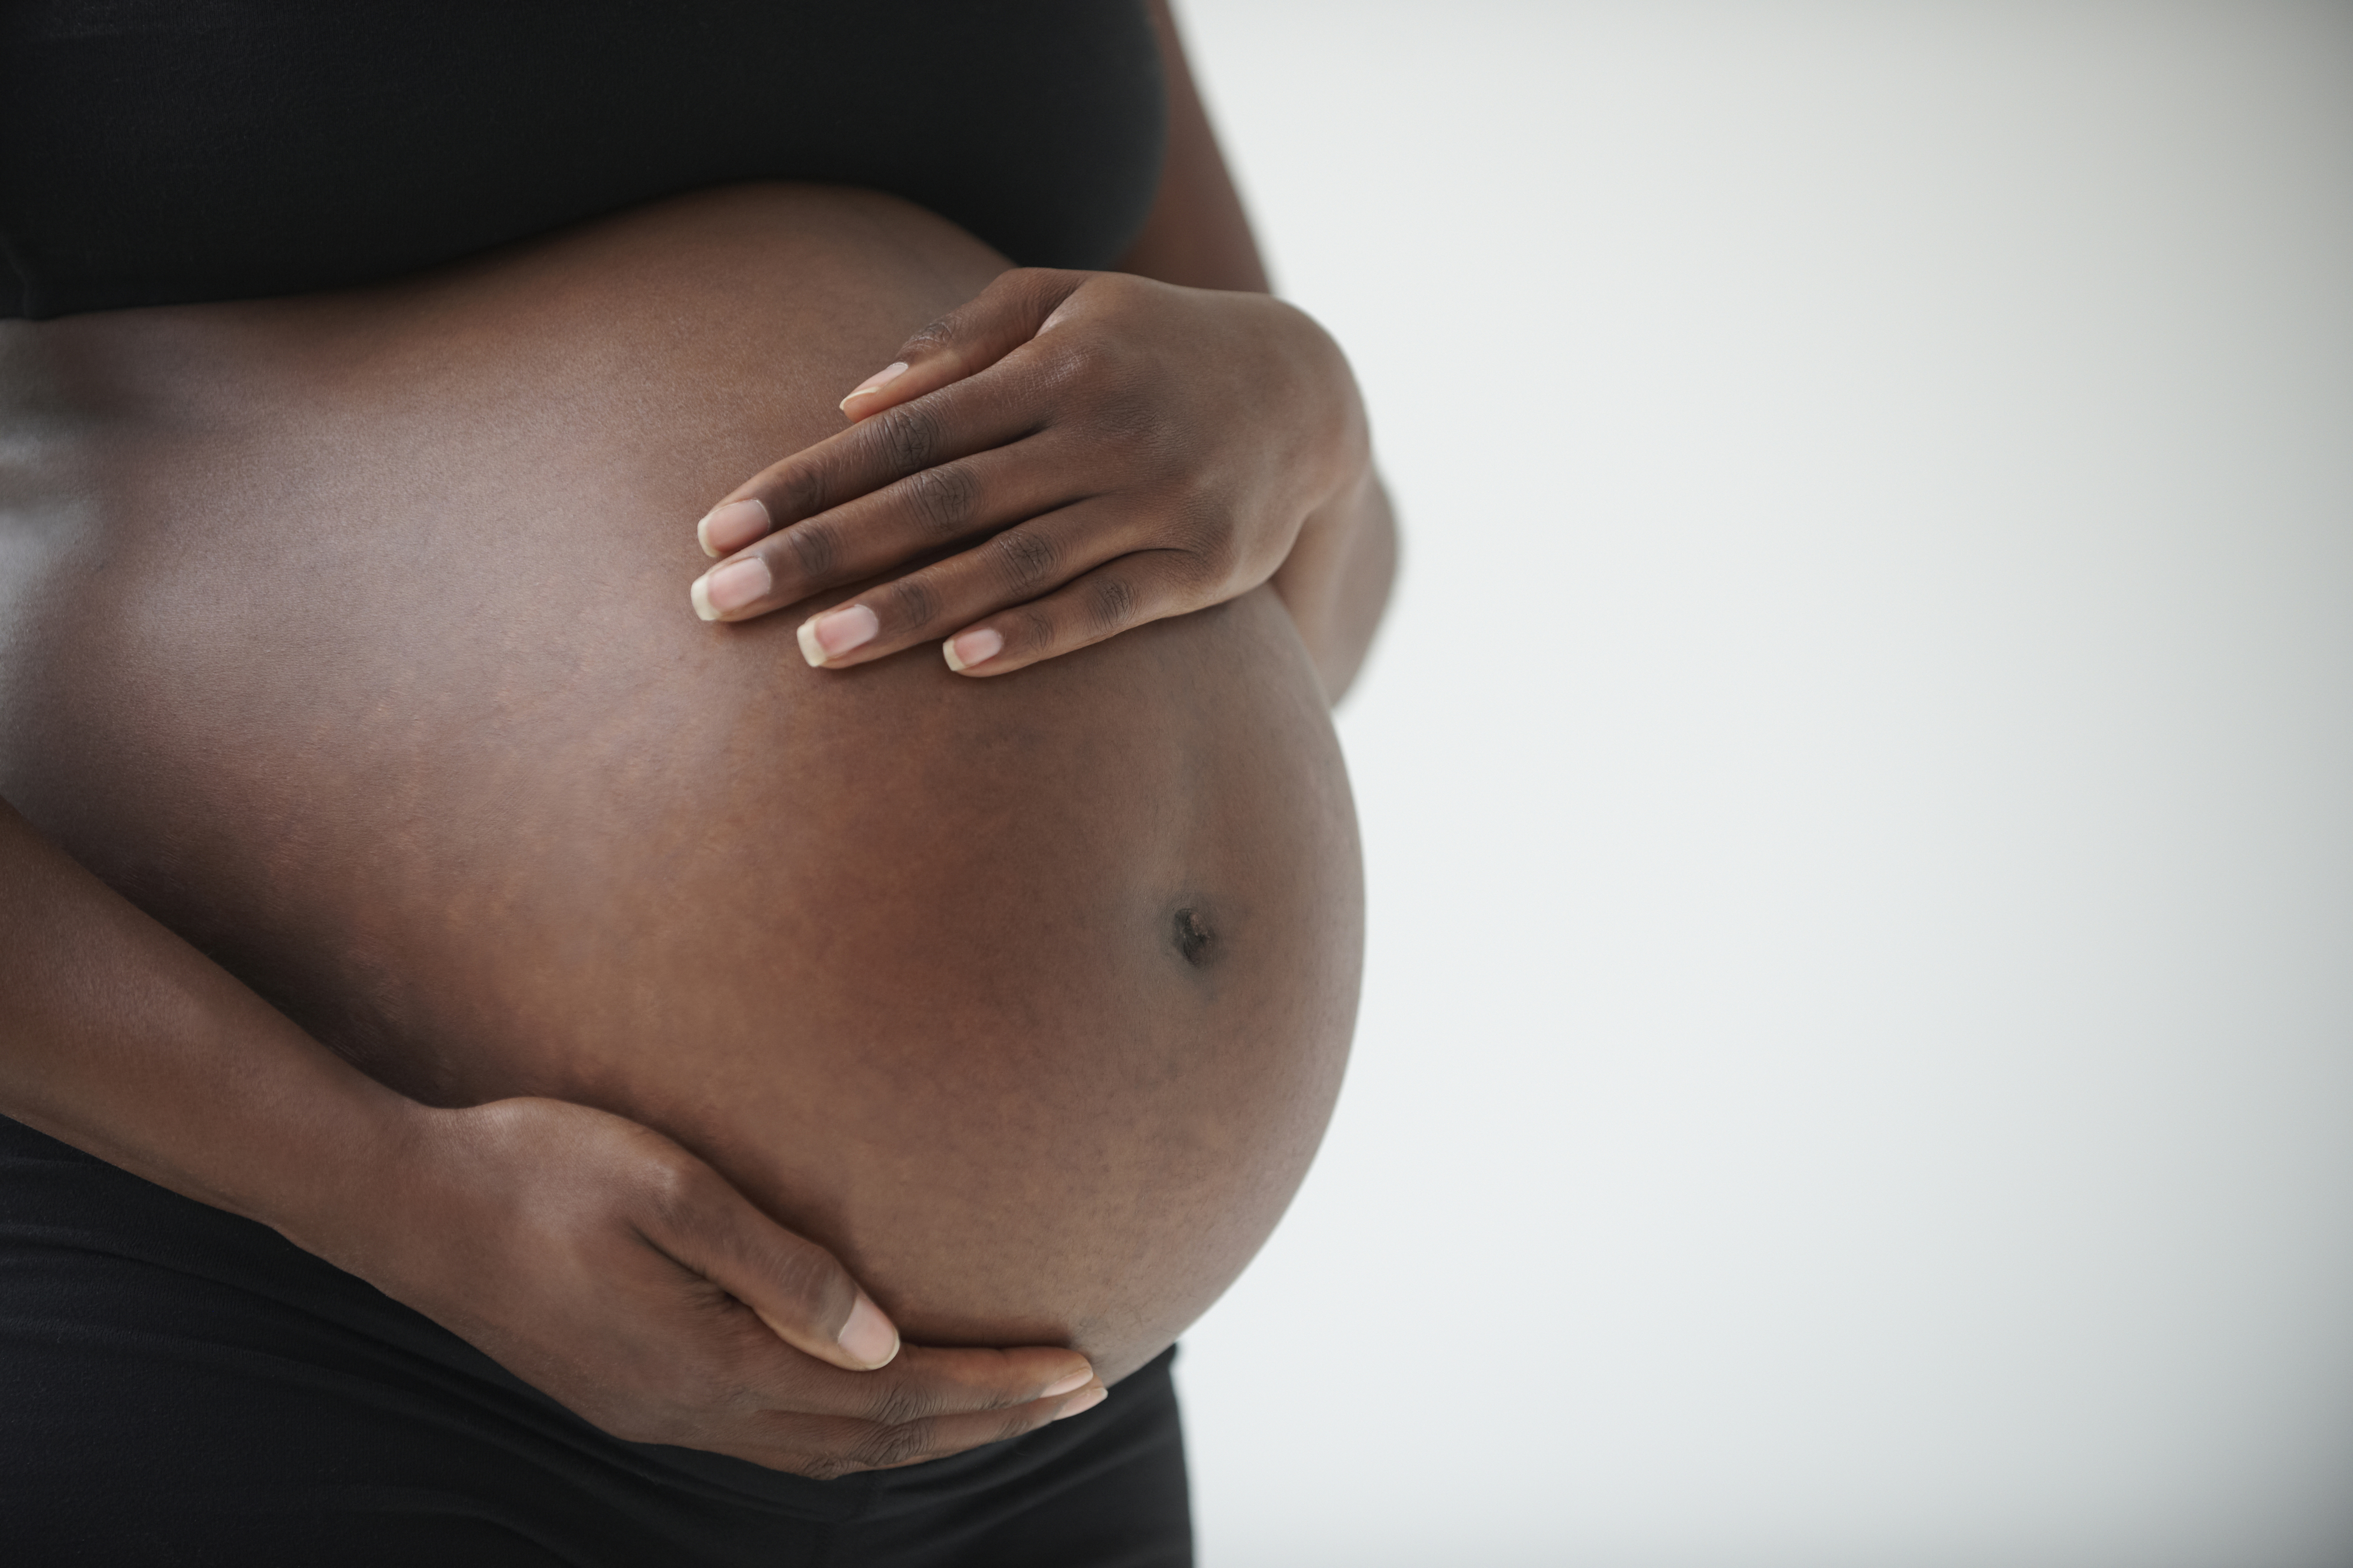 A close-up of a pregnant woman&#x27;s belly with her hands gently resting on it. The woman is wearing a black top and pants